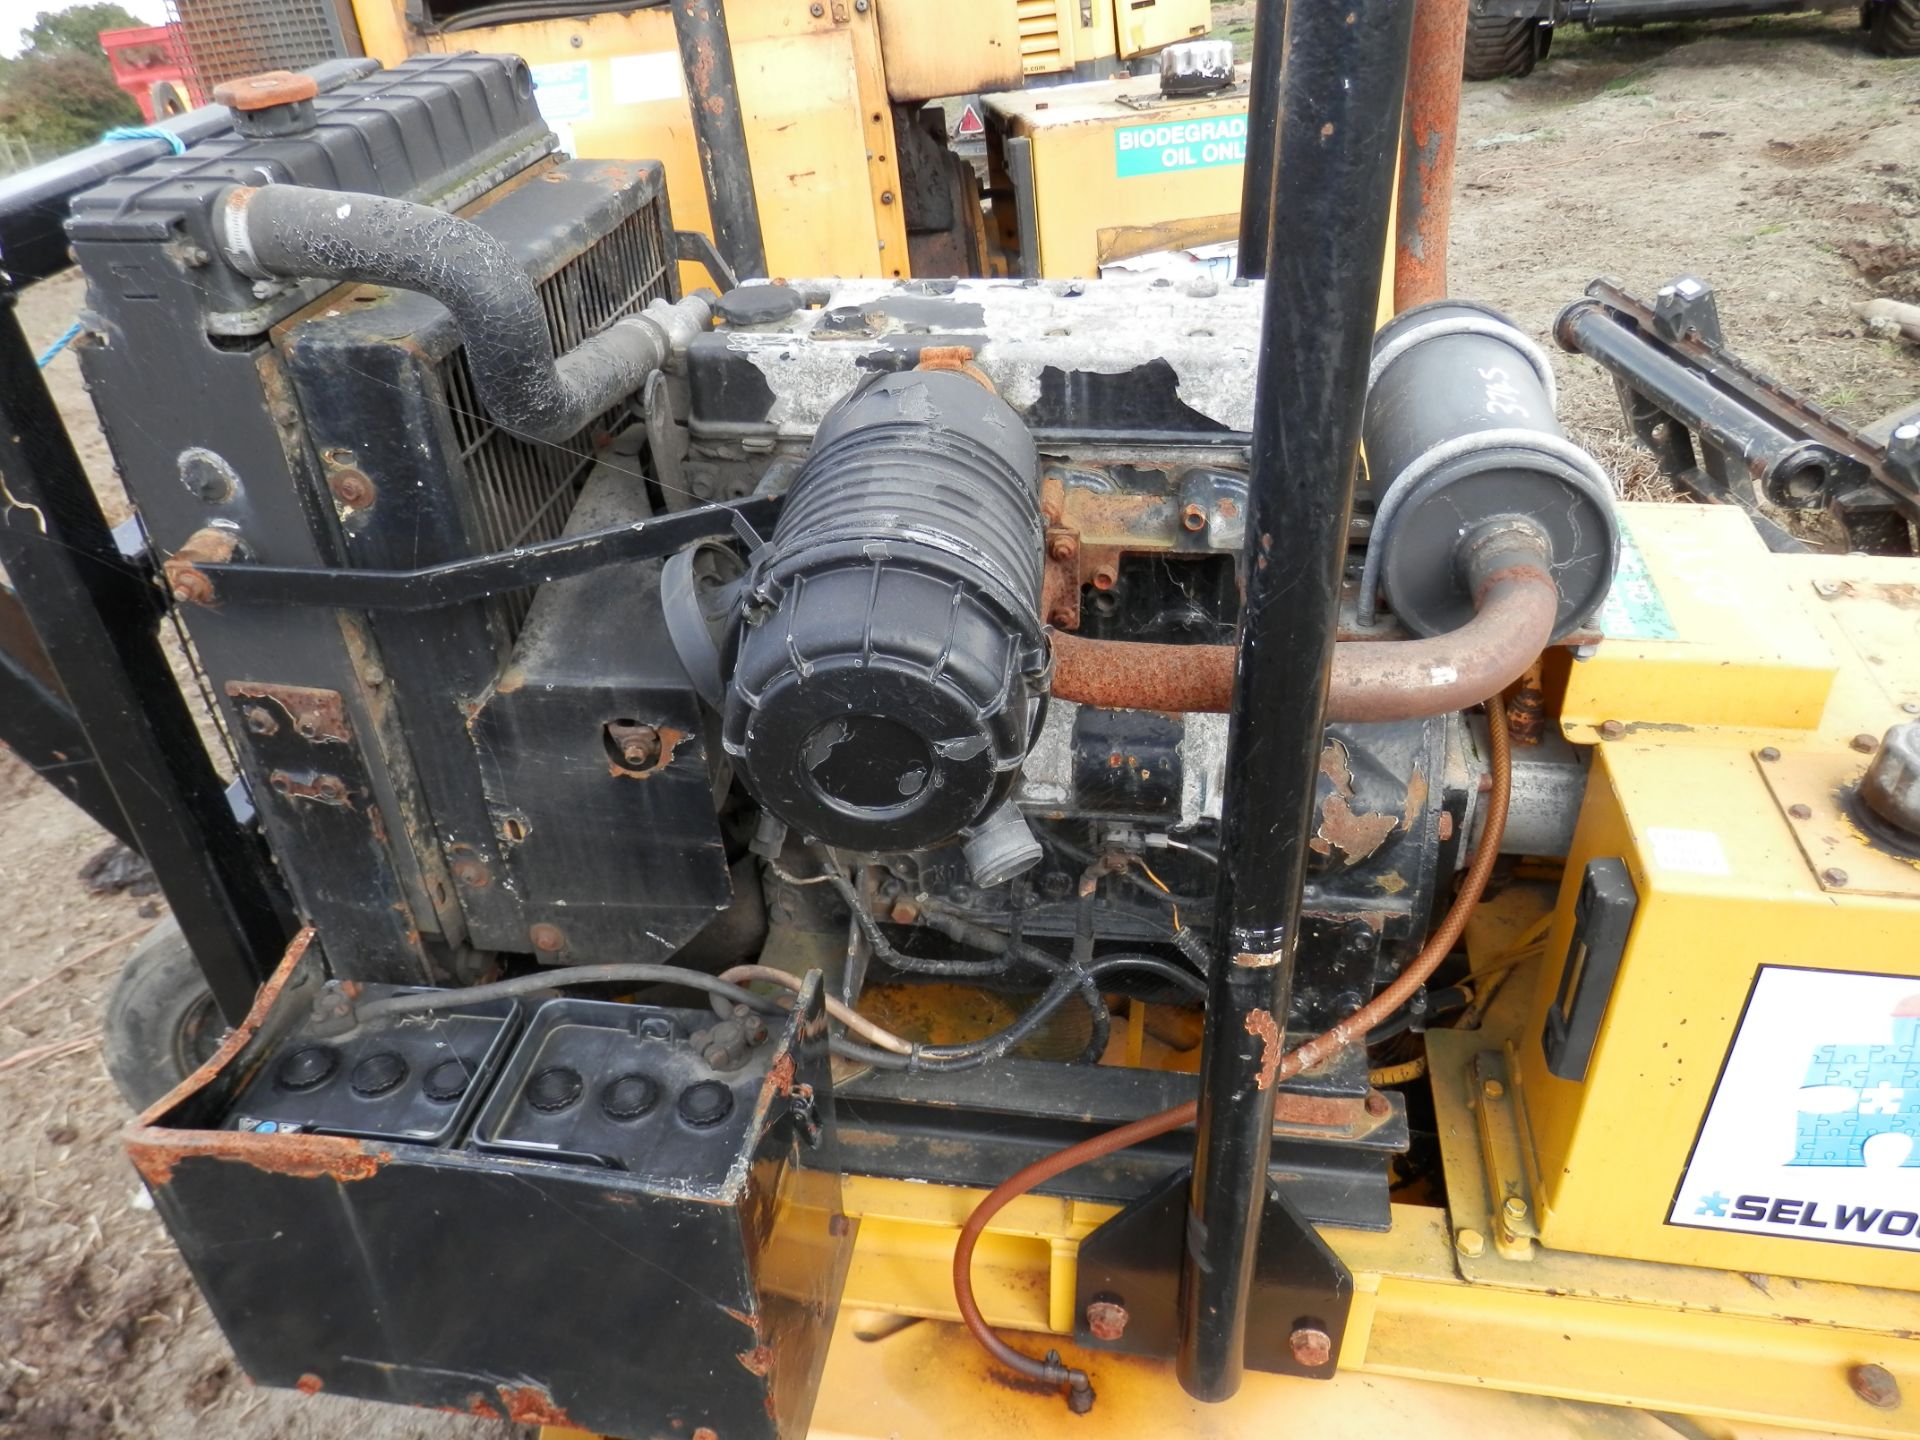 TOWABLE SELWOOD GERMAN MADE HYDRAULIC POWER PACK, 30 LT/MIN @ 240 BAR - Image 3 of 6